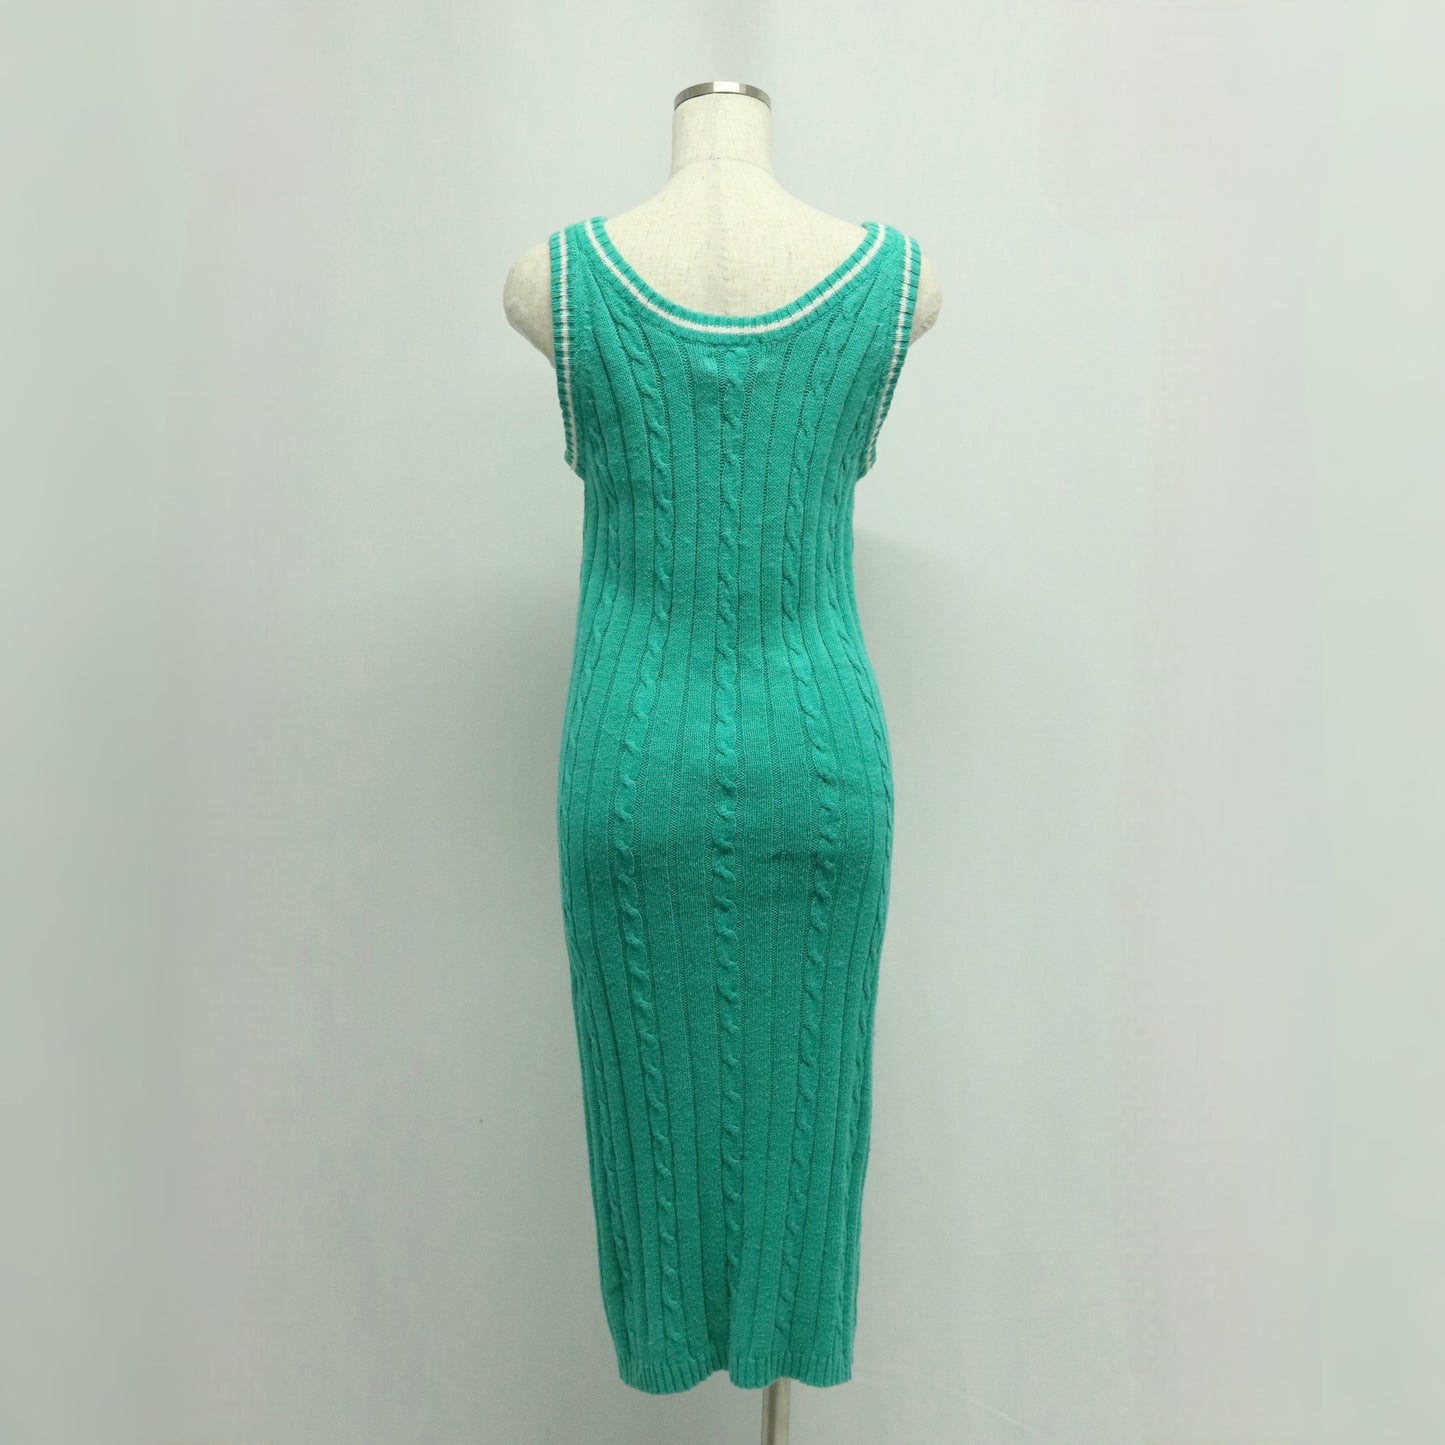 90's "Aria" knit long one-piece